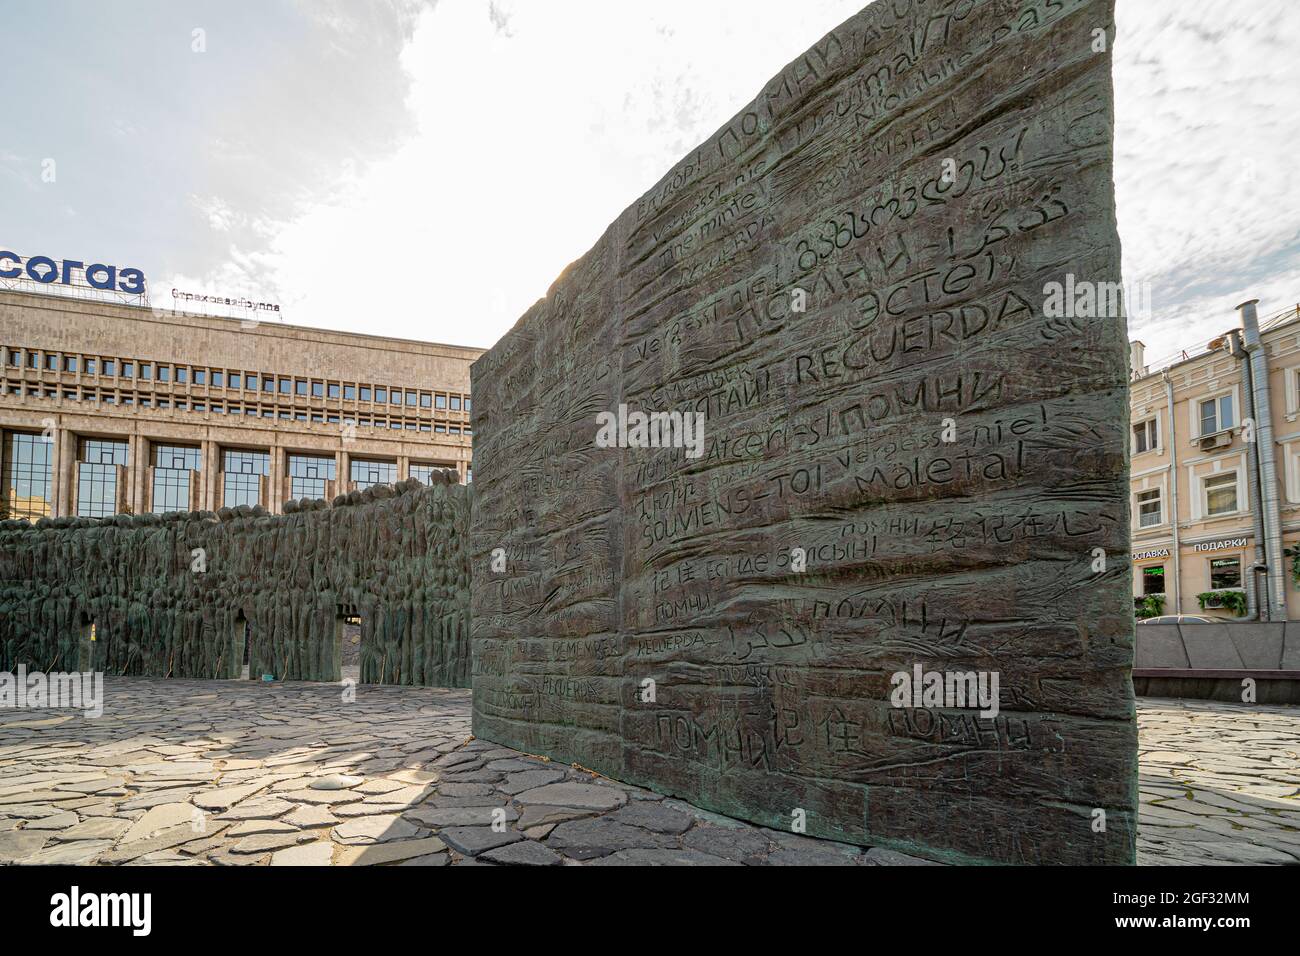 Wall of Grief, monument to victims of political persecution by J. Stalin, designed in bronze and stone by Georgy Frangulyan, Moscow, Russia Stock Photo